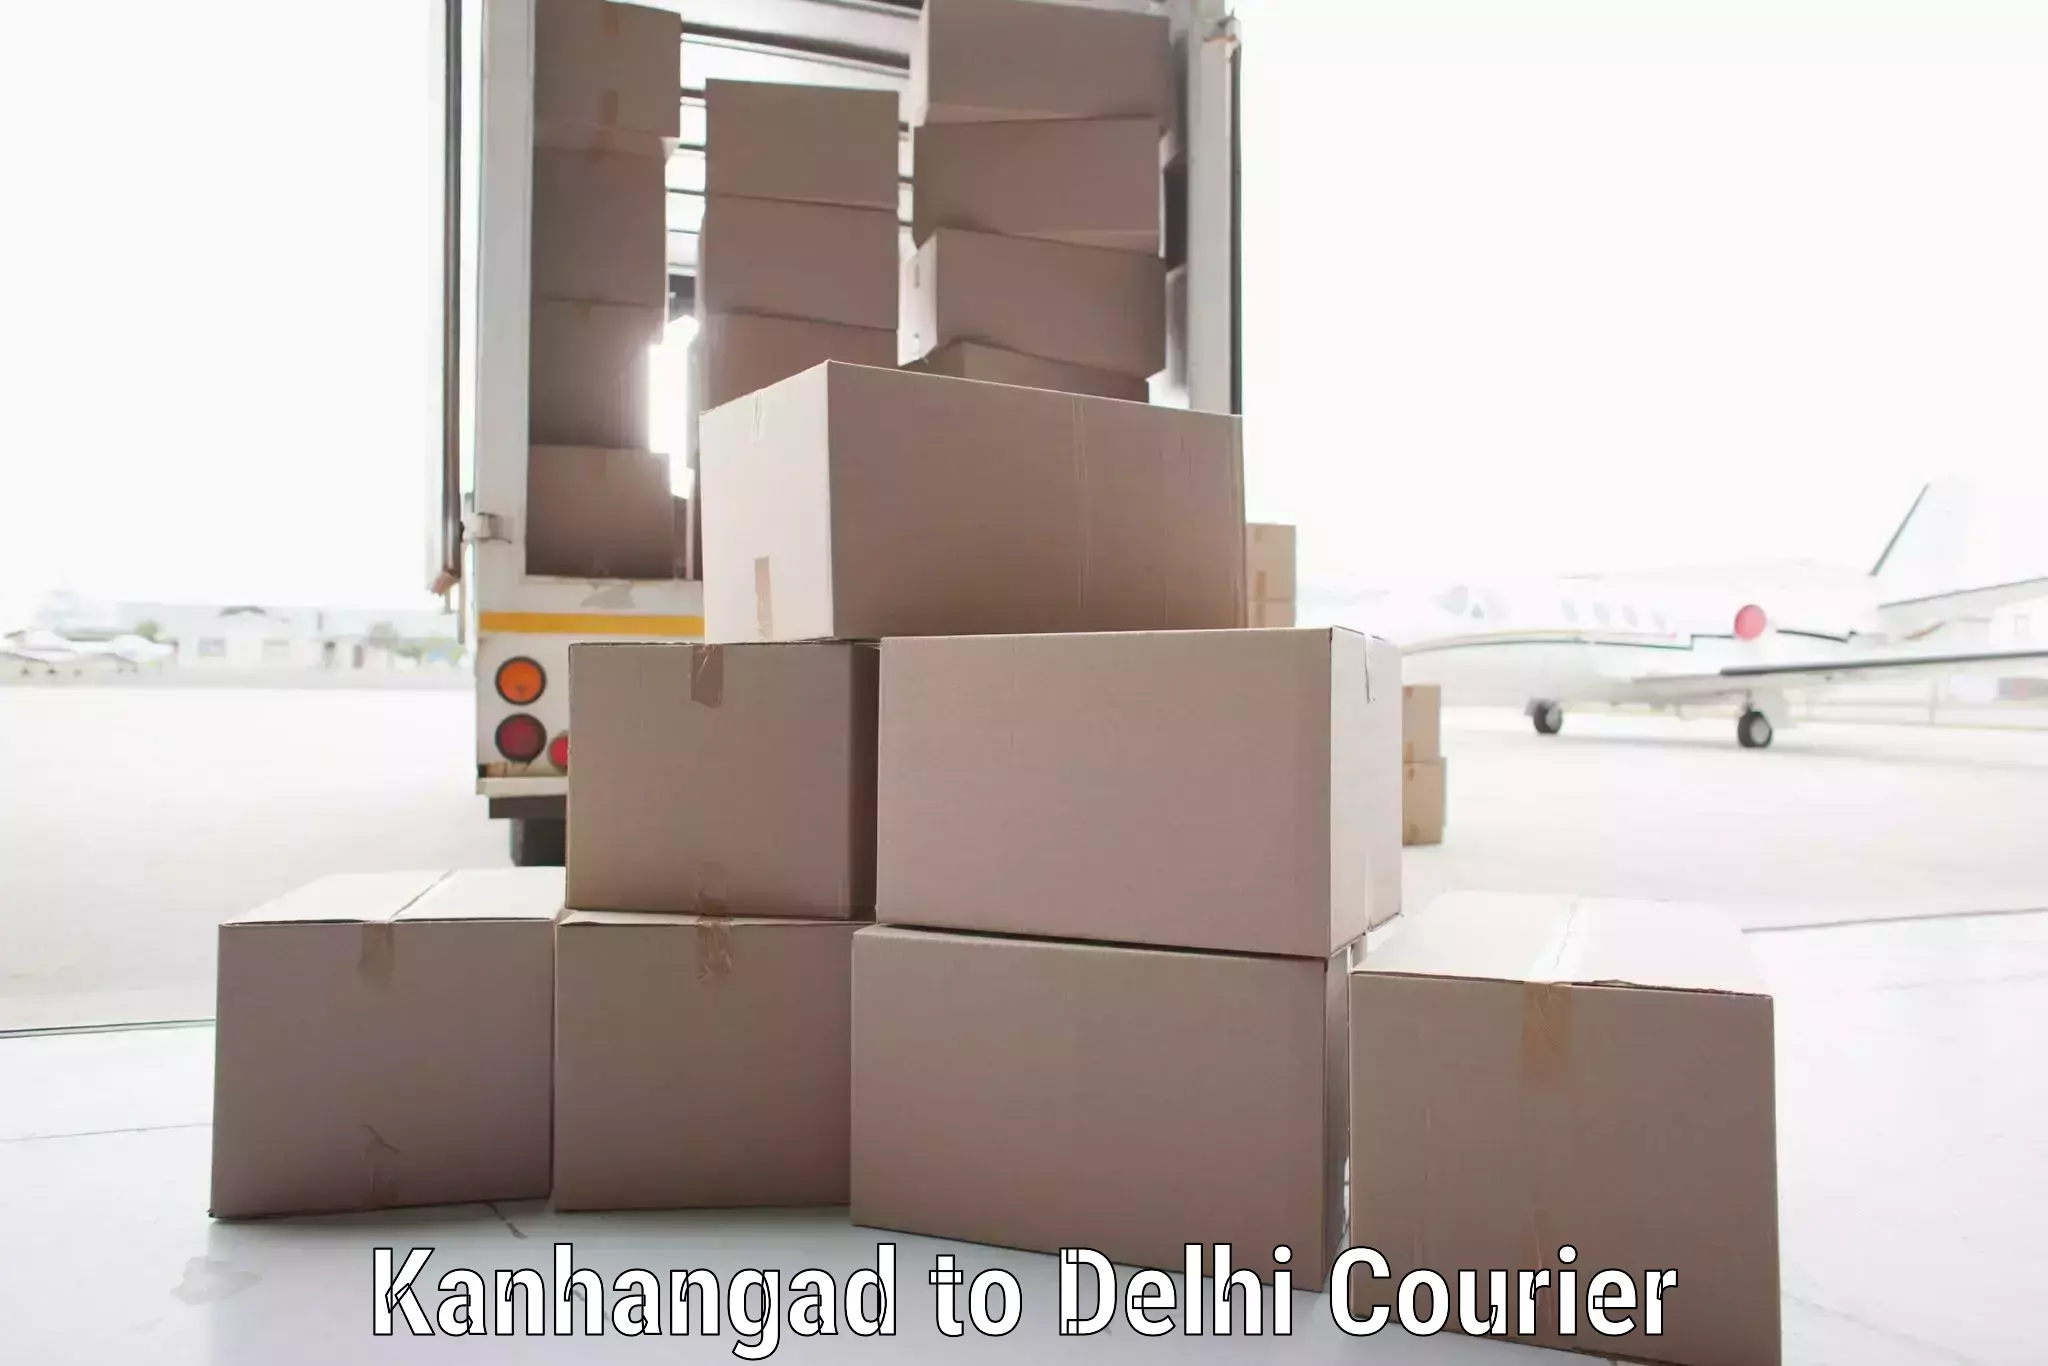 Global shipping networks in Kanhangad to Delhi